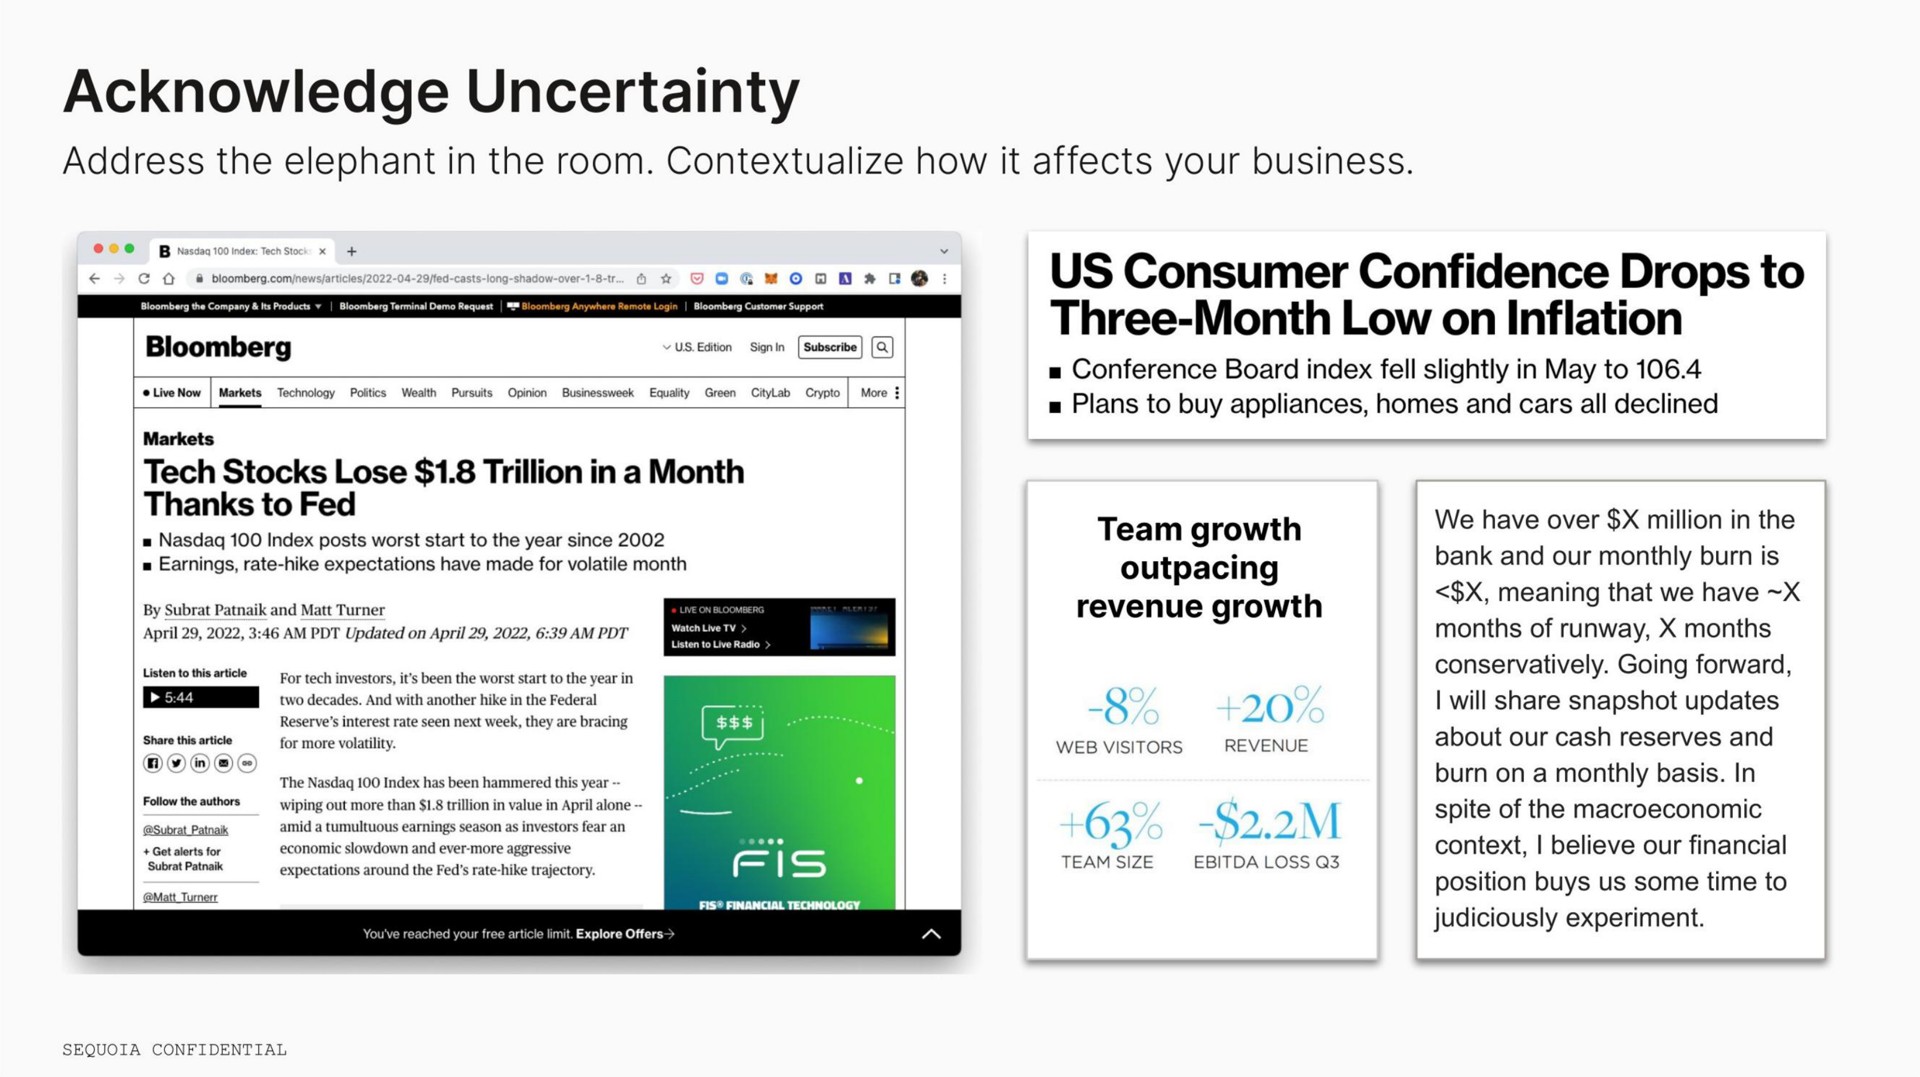 acknowledge uncertainty mine us consumer confidence drops to | Sequoia Capital